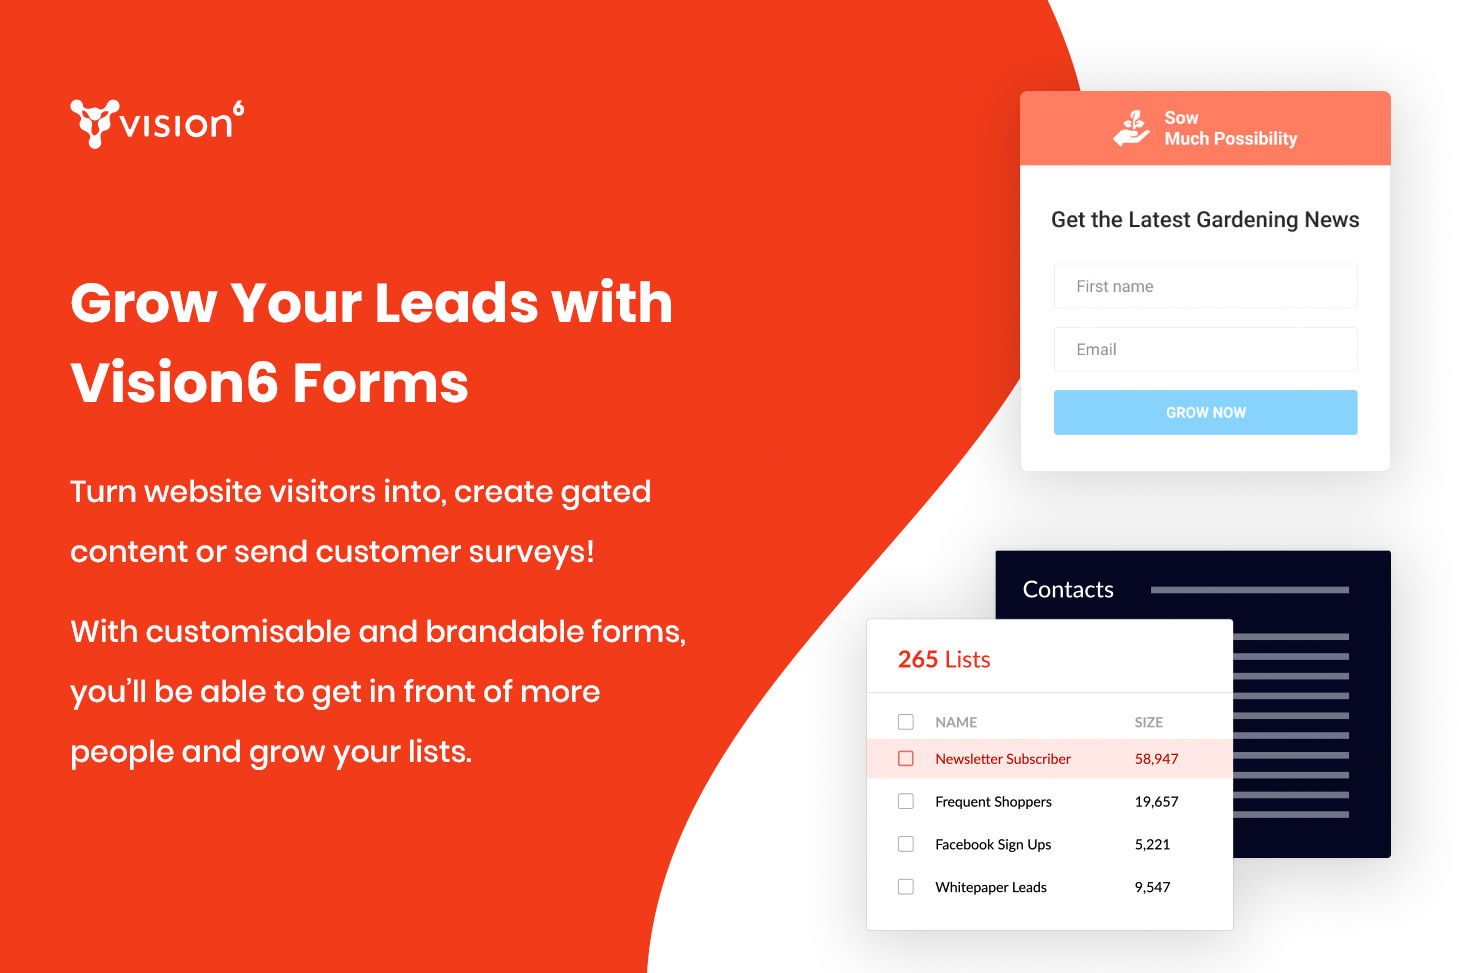 Get More Leads with Customisable Web Forms